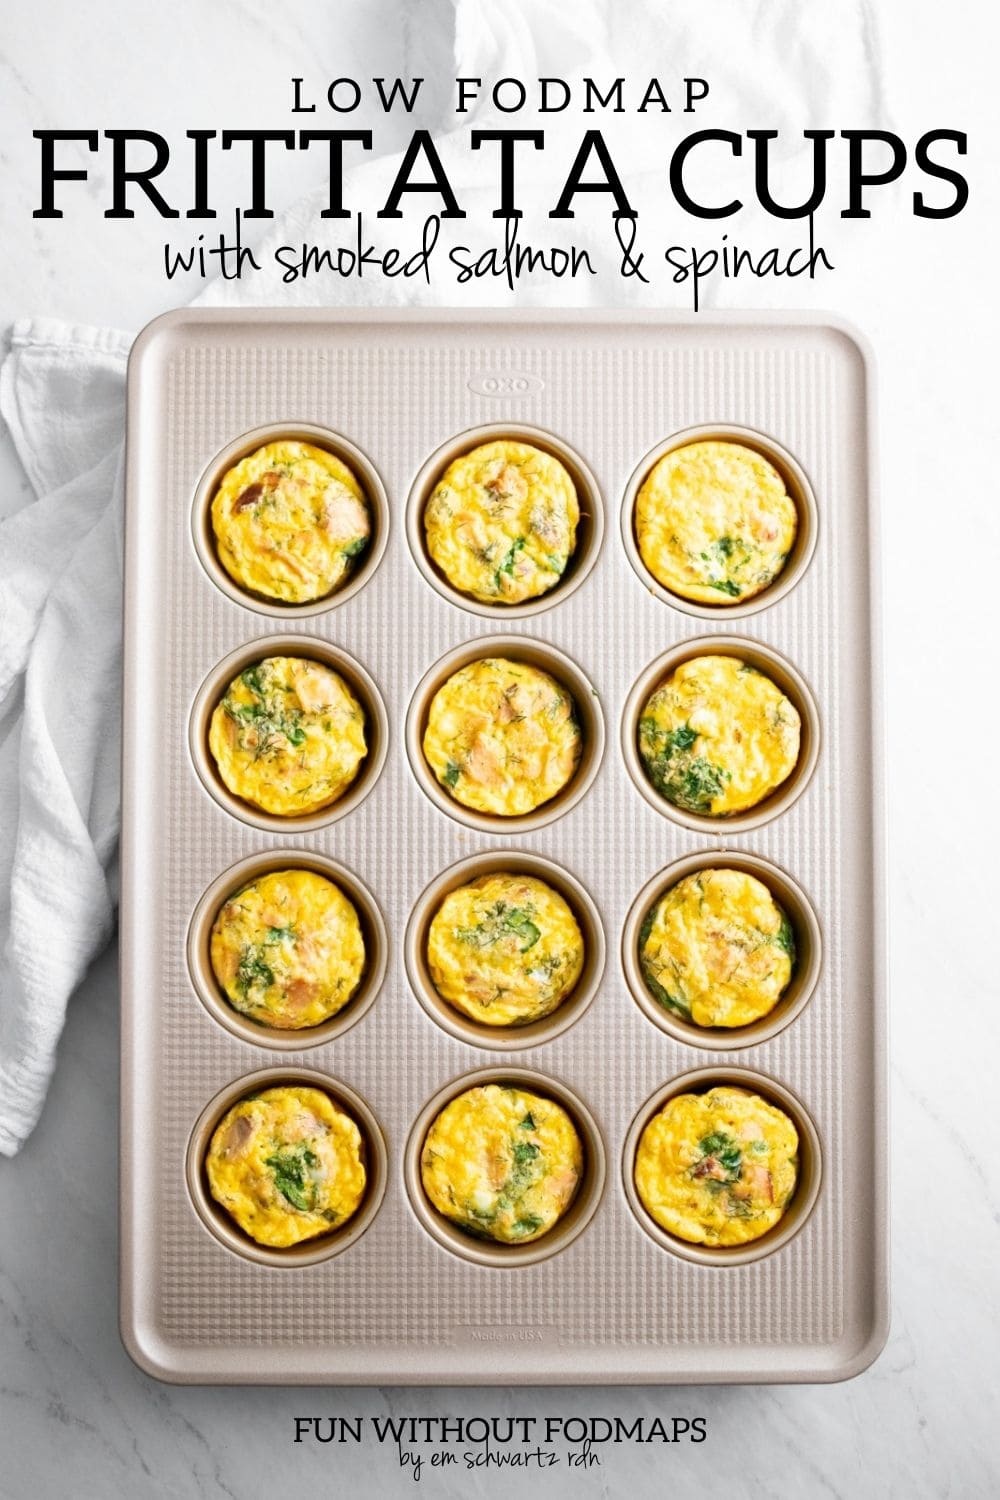 A muffin tin filled with baked egg muffins. In the white space above, black text reads "Low FODMAP Frittata Cups with Smoked Salmon and Spinach"